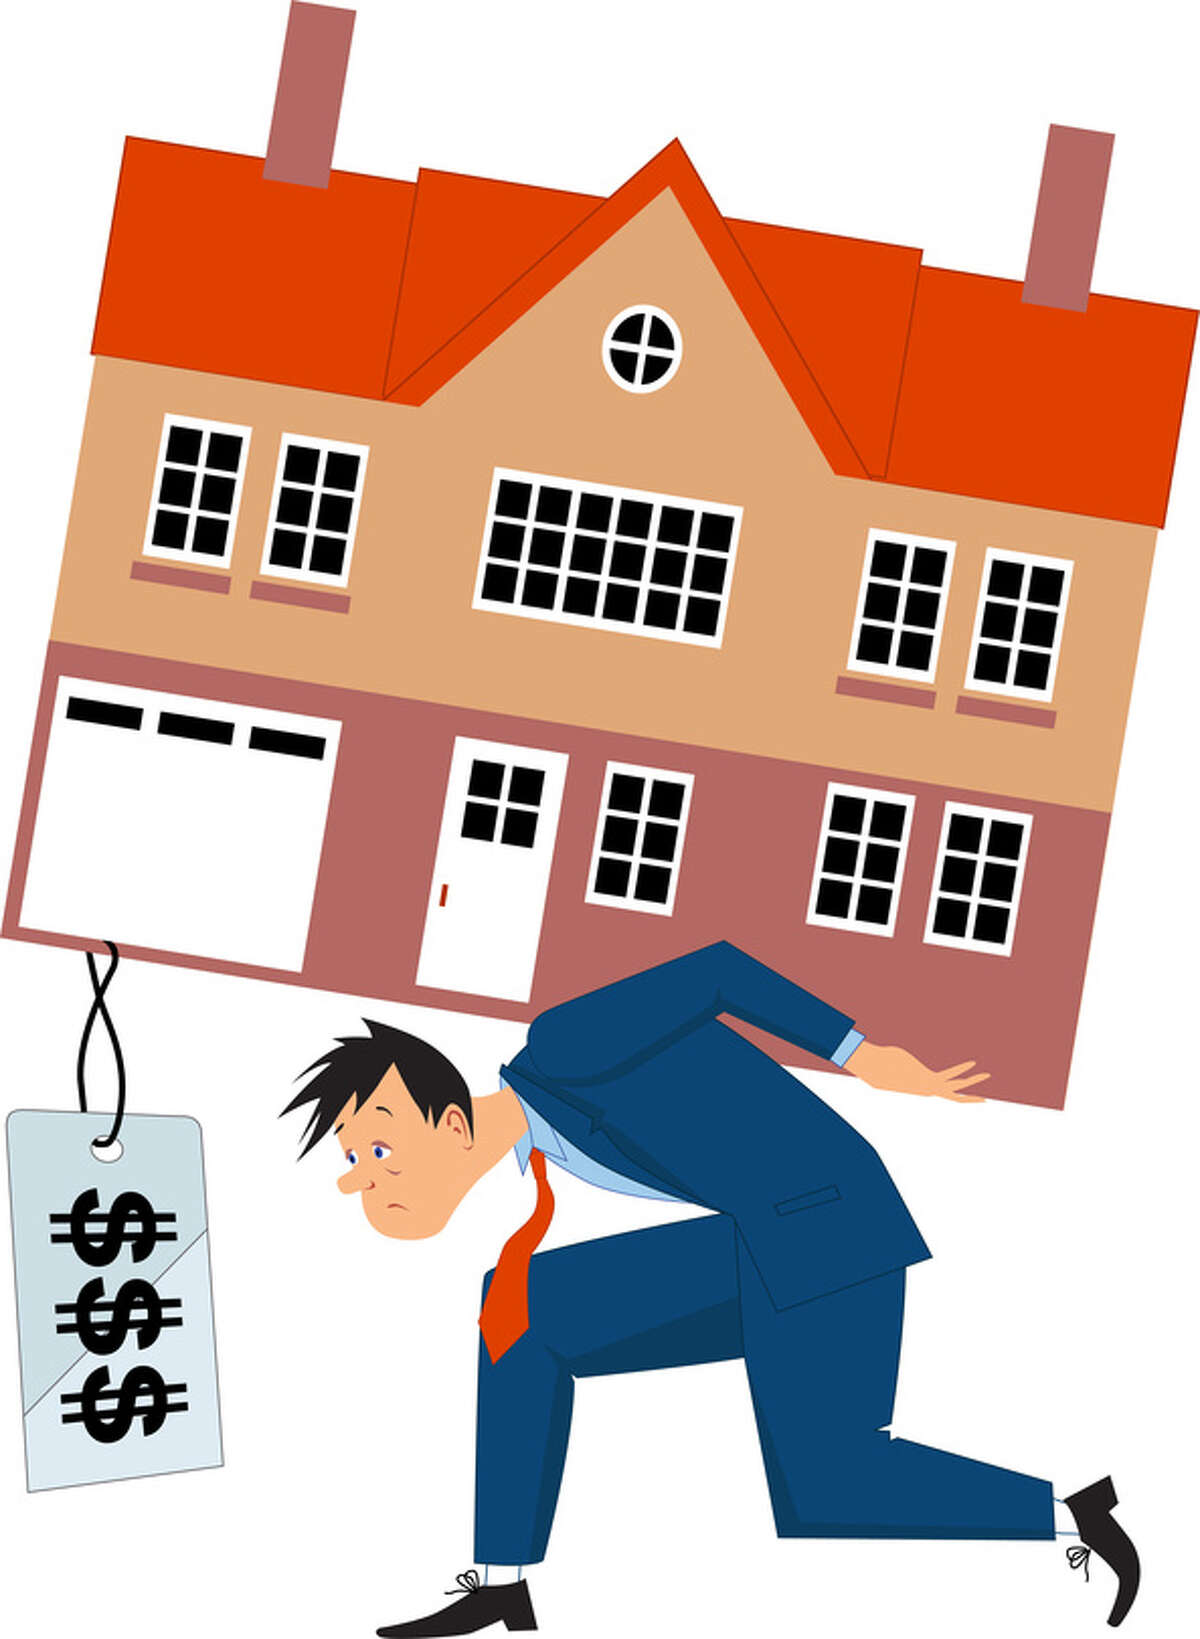 Man overburdened by expensive house. Illustration